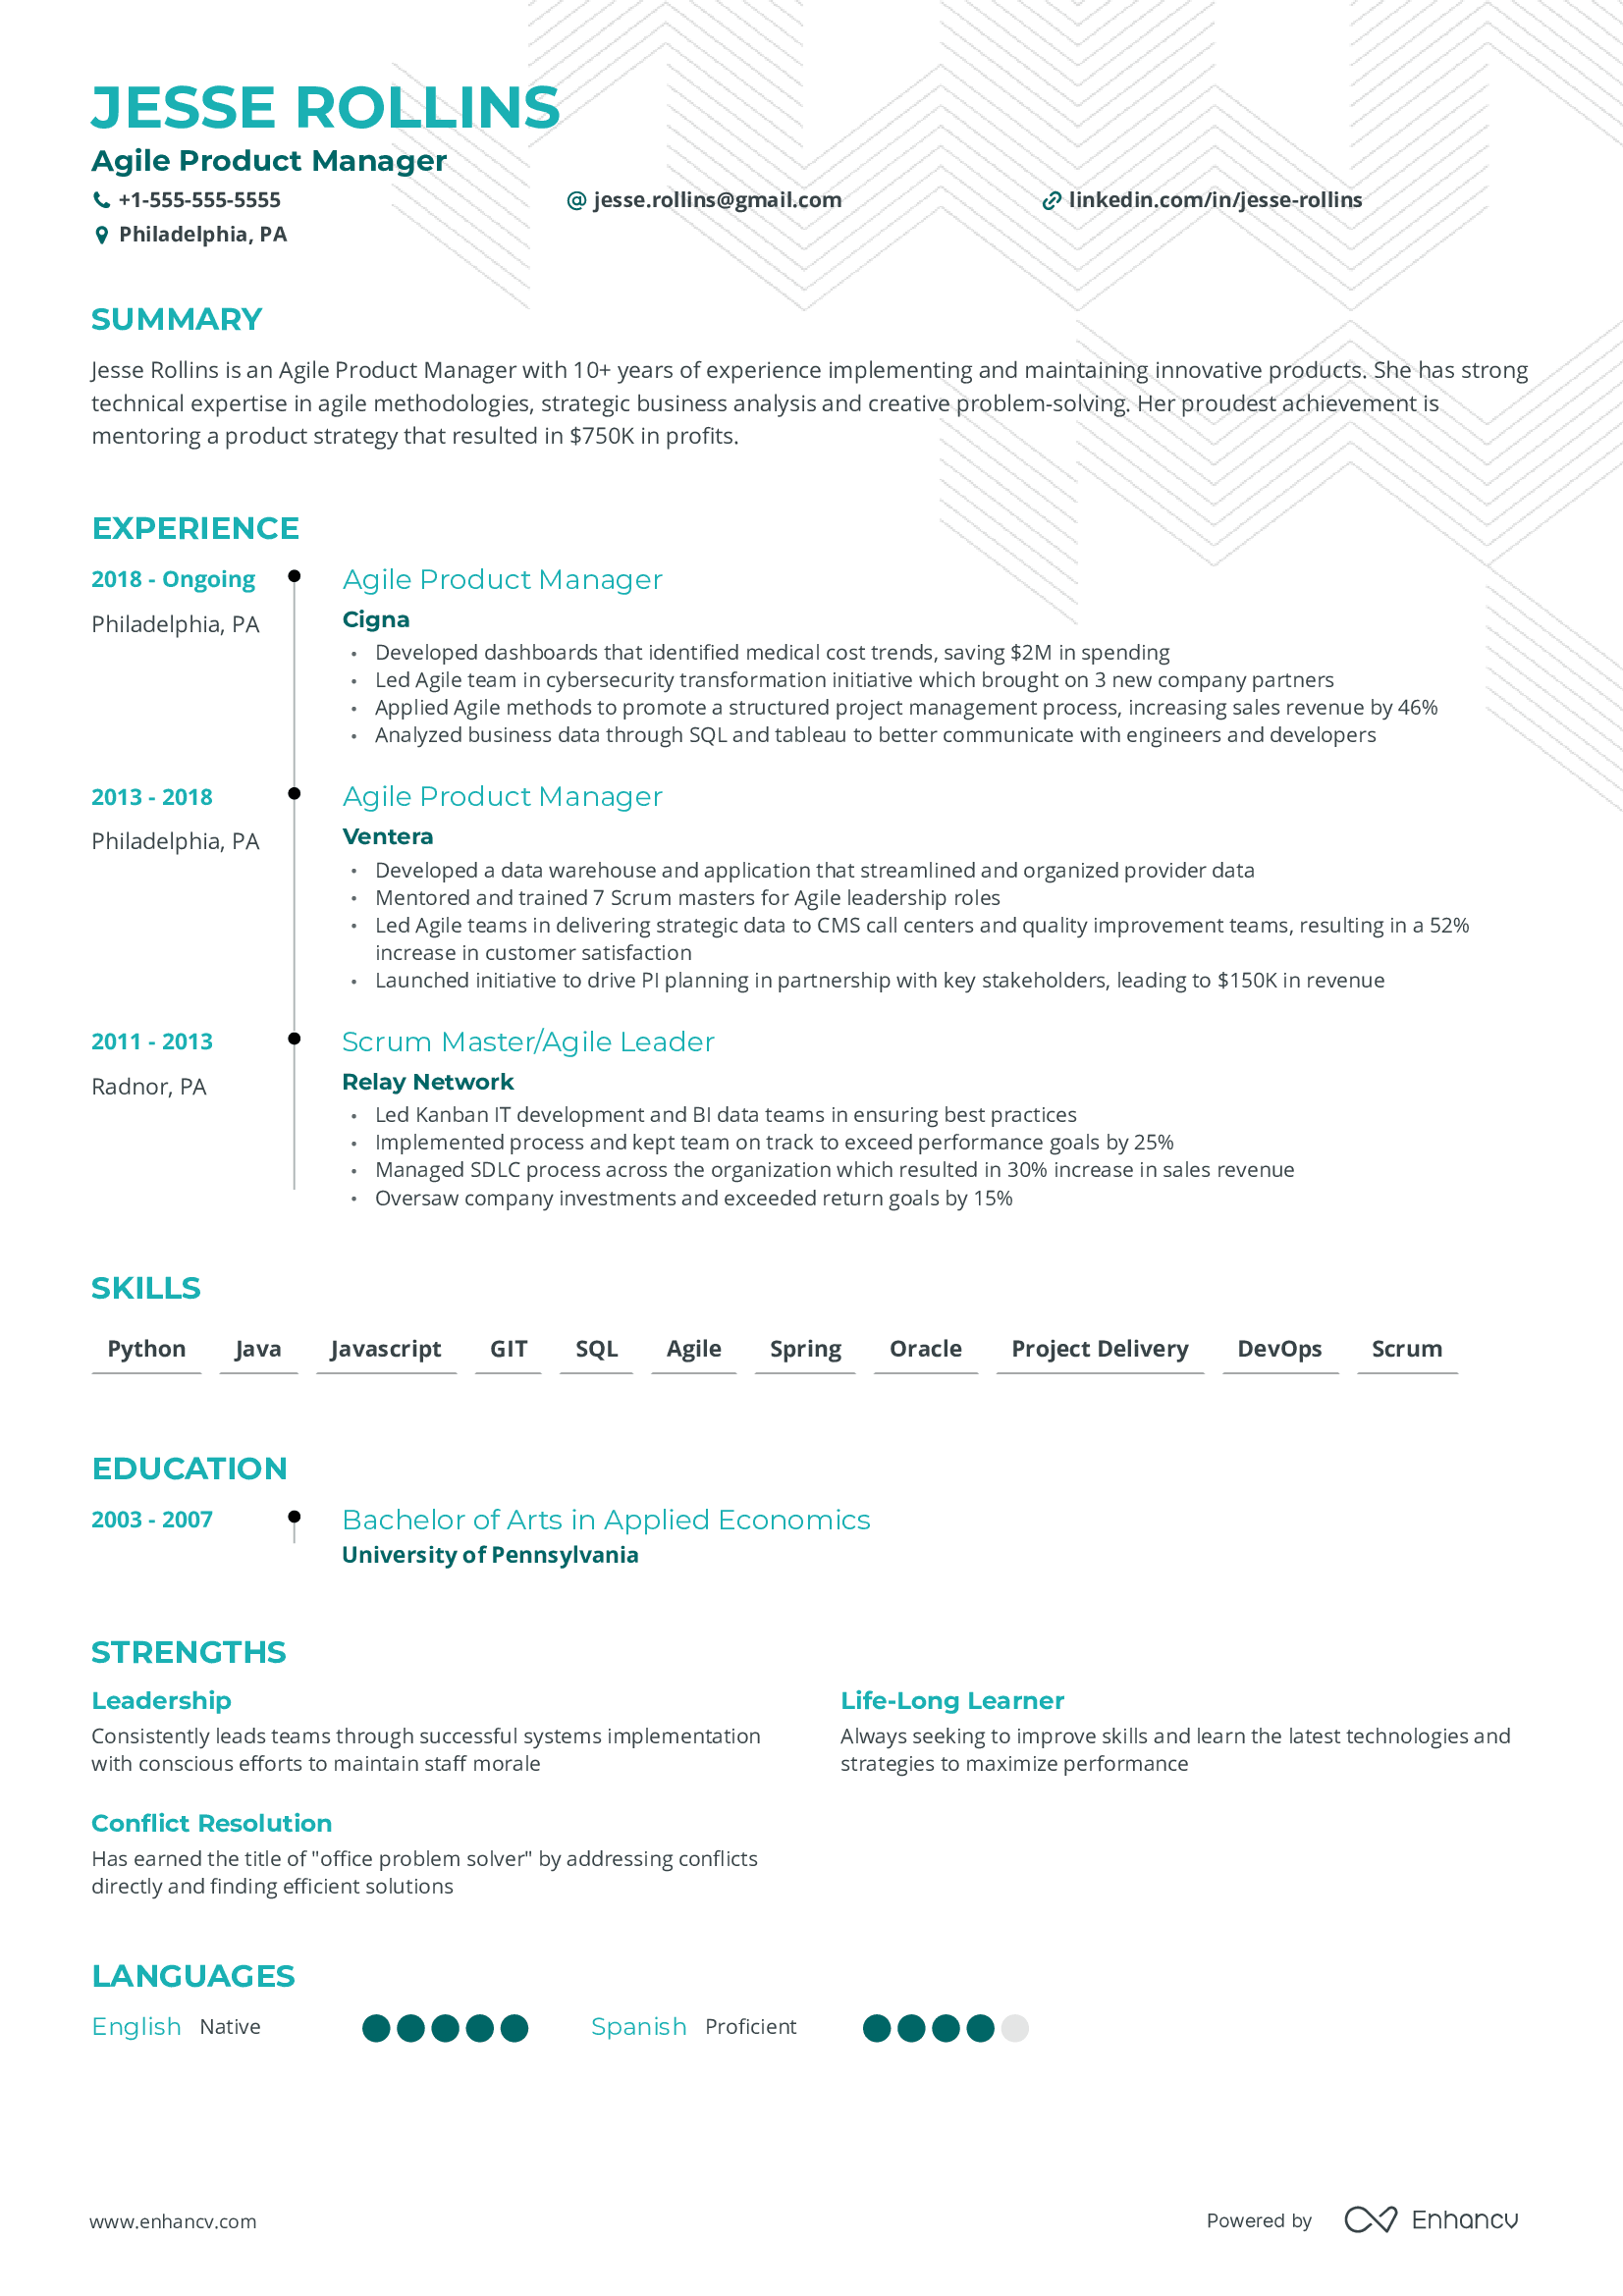 Agile product manager resume.png